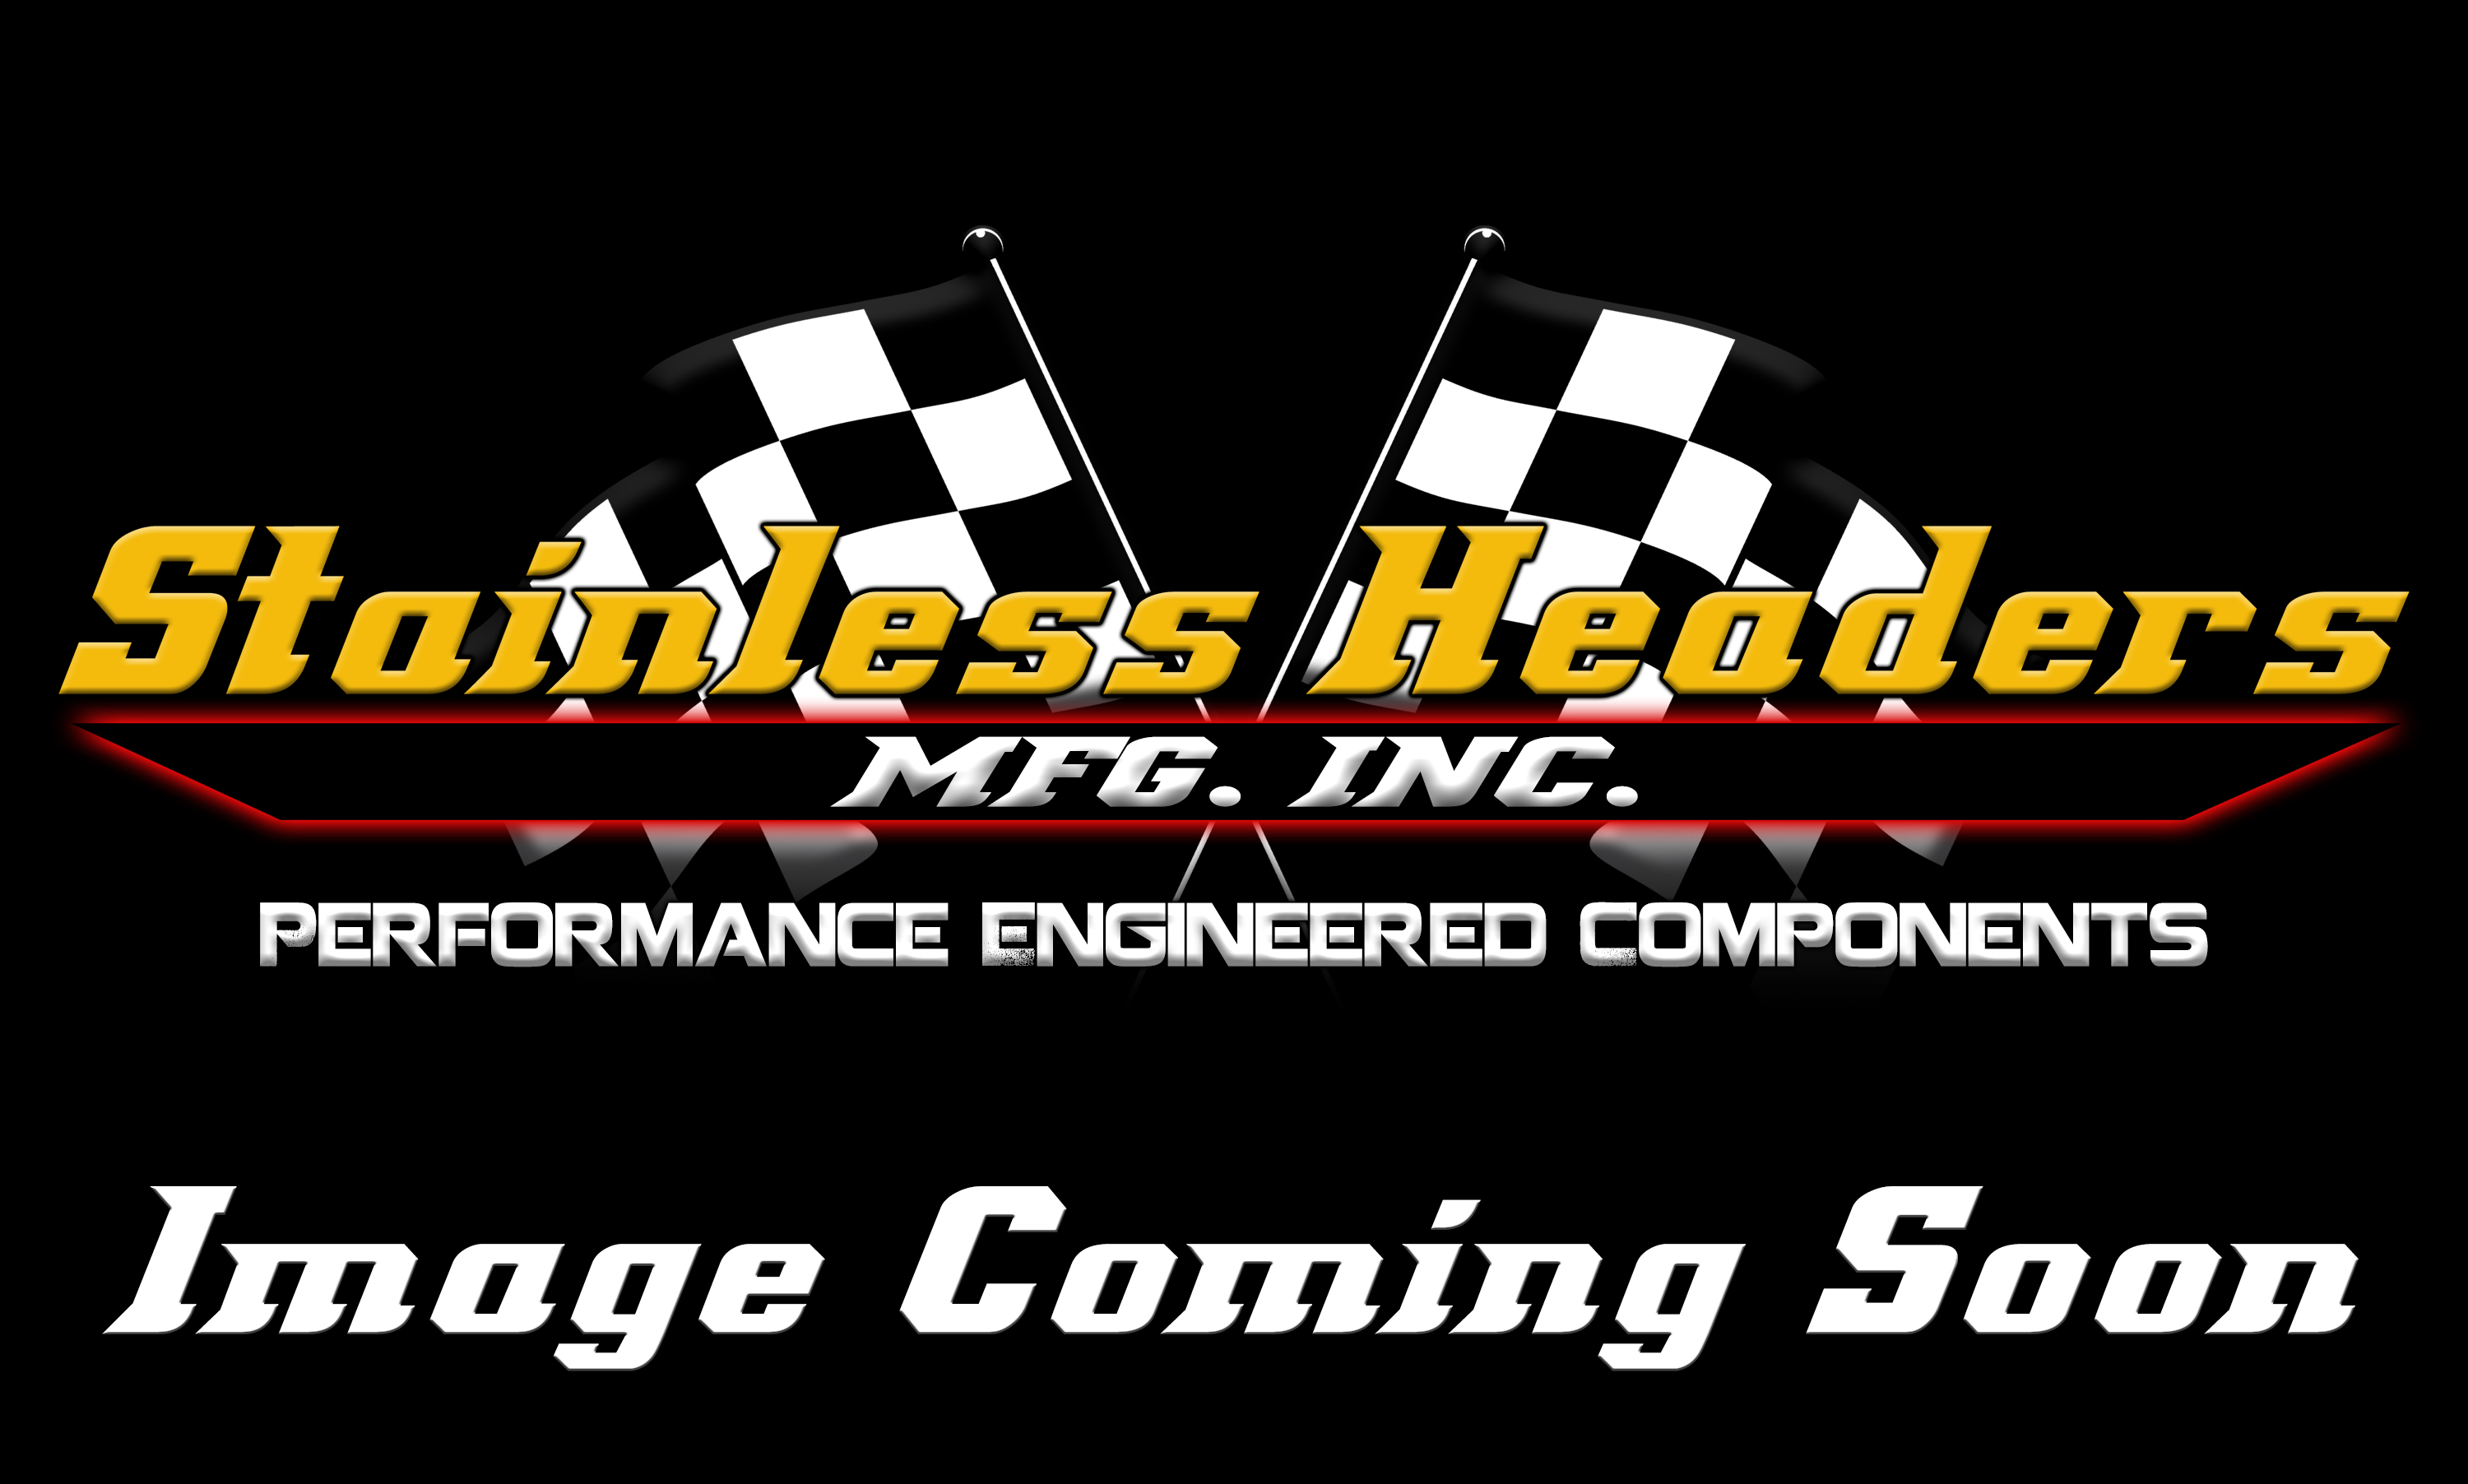 Stainless Headers - 1 3/4" Primary 8 into 1 Performance Merge Collector-16ga 304ss - Image 1